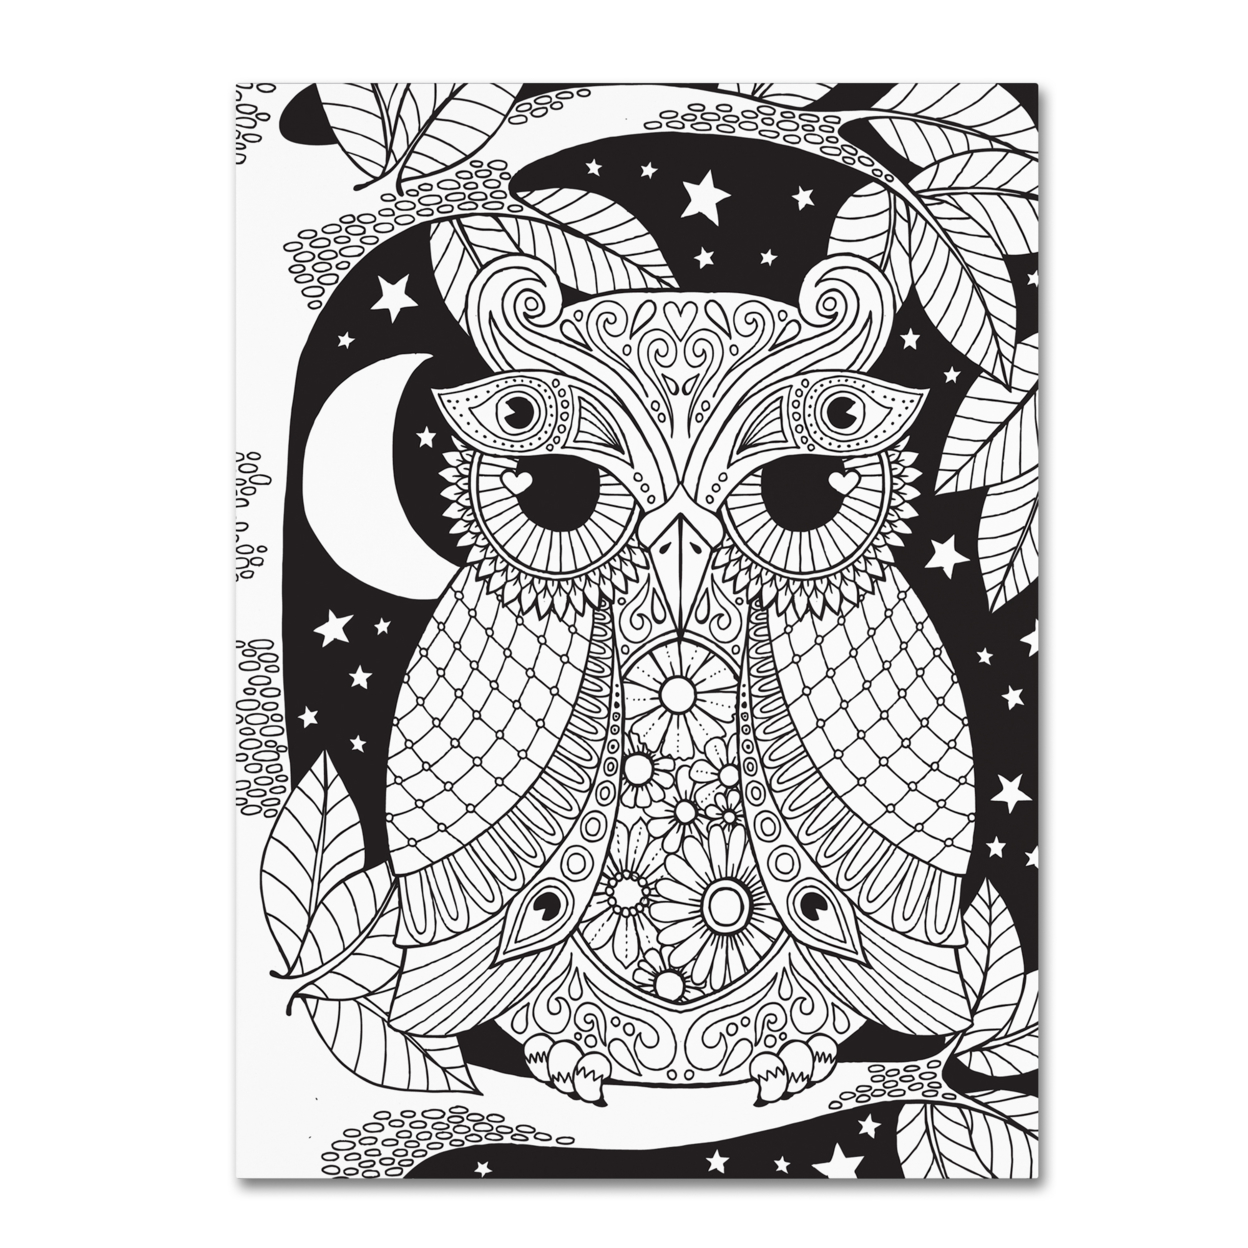 Hello Angel 'Owl On A Branch' Canvas Wall Art 35 X 47 Inches